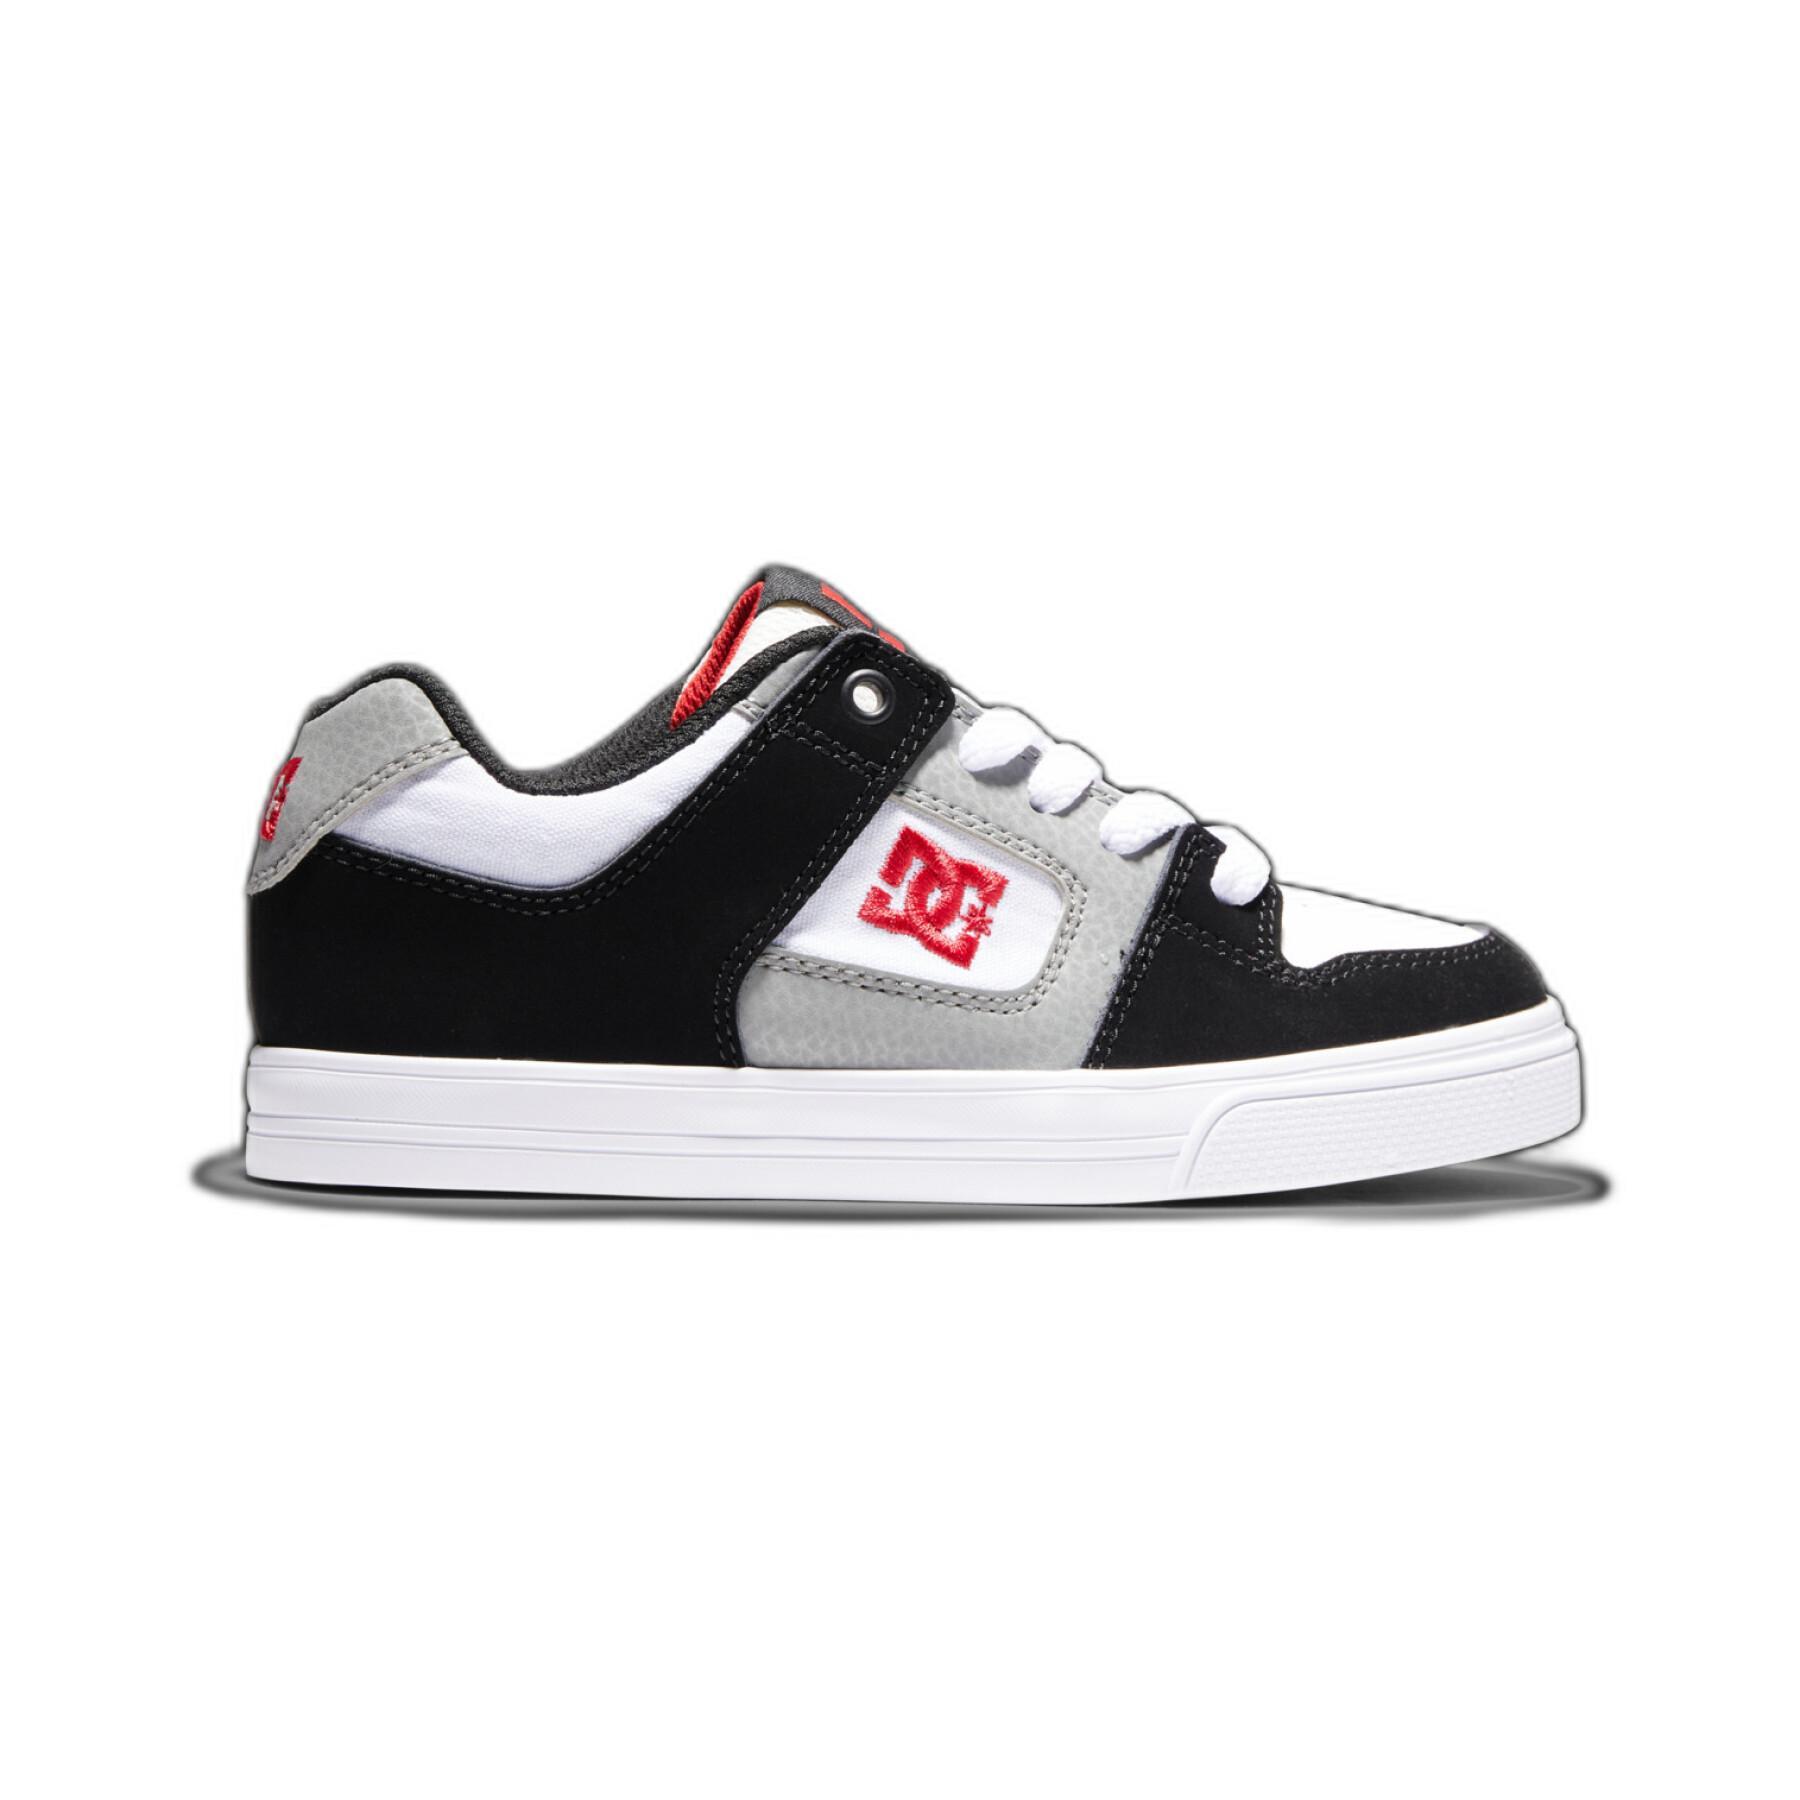 Children's sneakers DC Shoes Pure